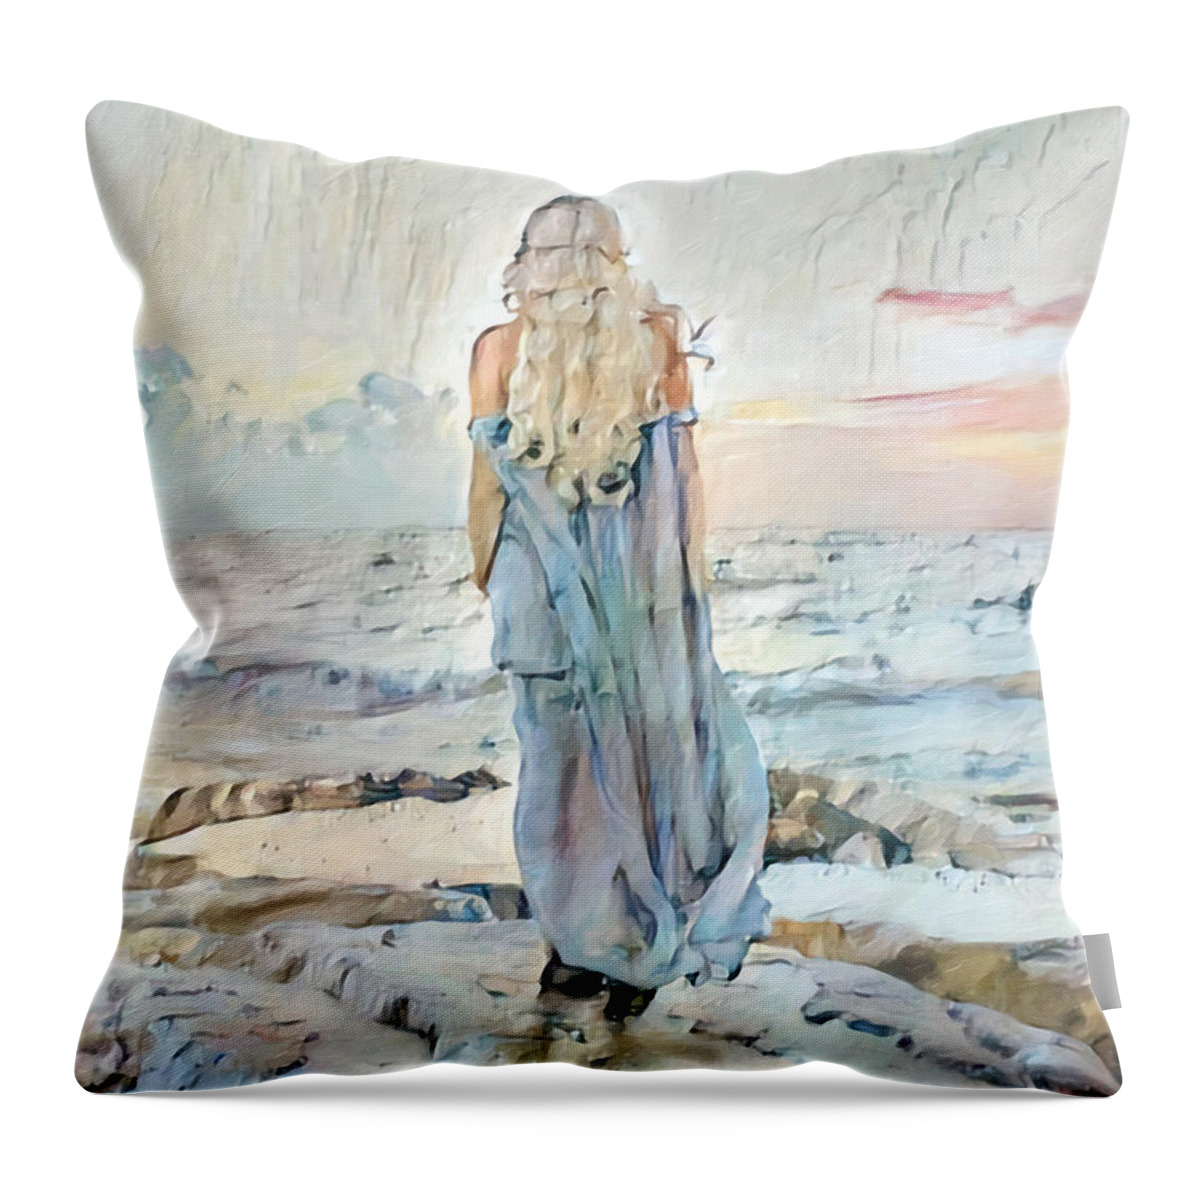 Woman Throw Pillow featuring the digital art Desolate or Contemplative by Chris Armytage